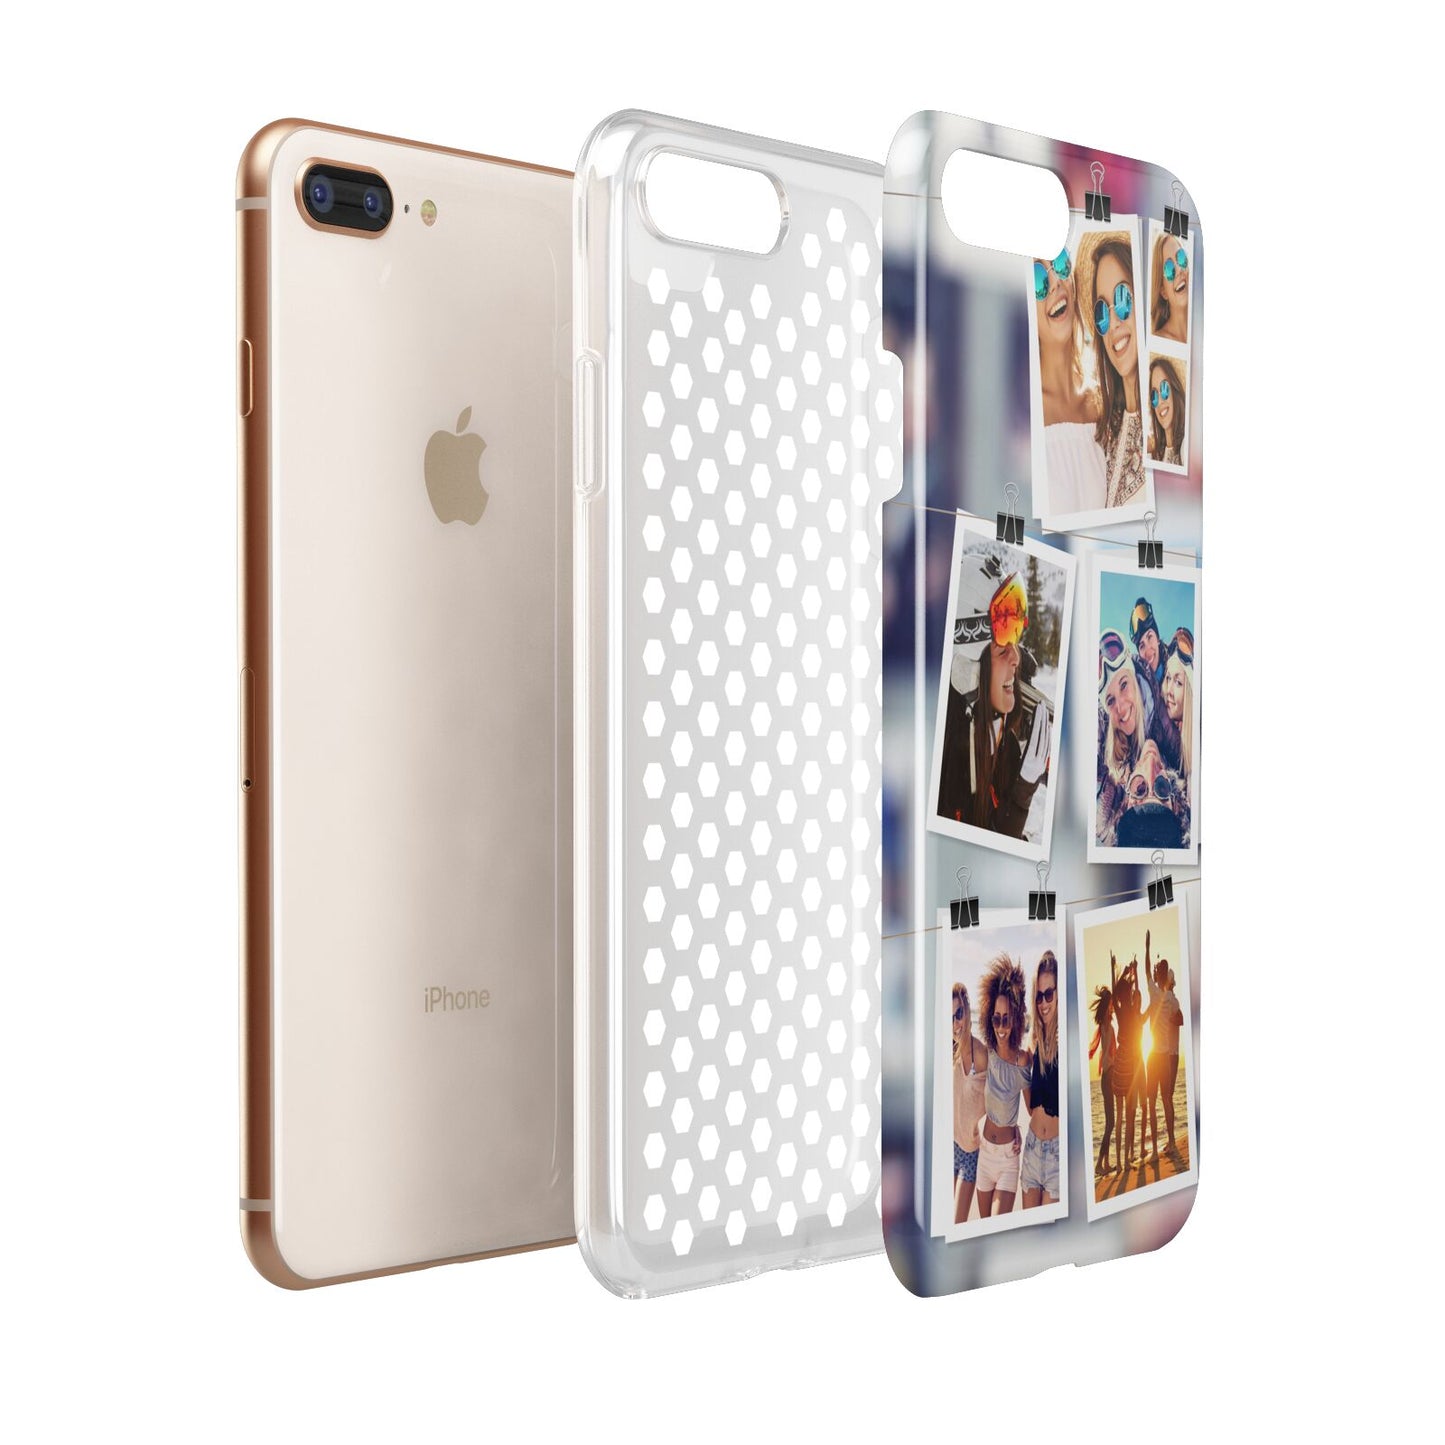 Photo Wall Montage Upload Apple iPhone 7 8 Plus 3D Tough Case Expanded View